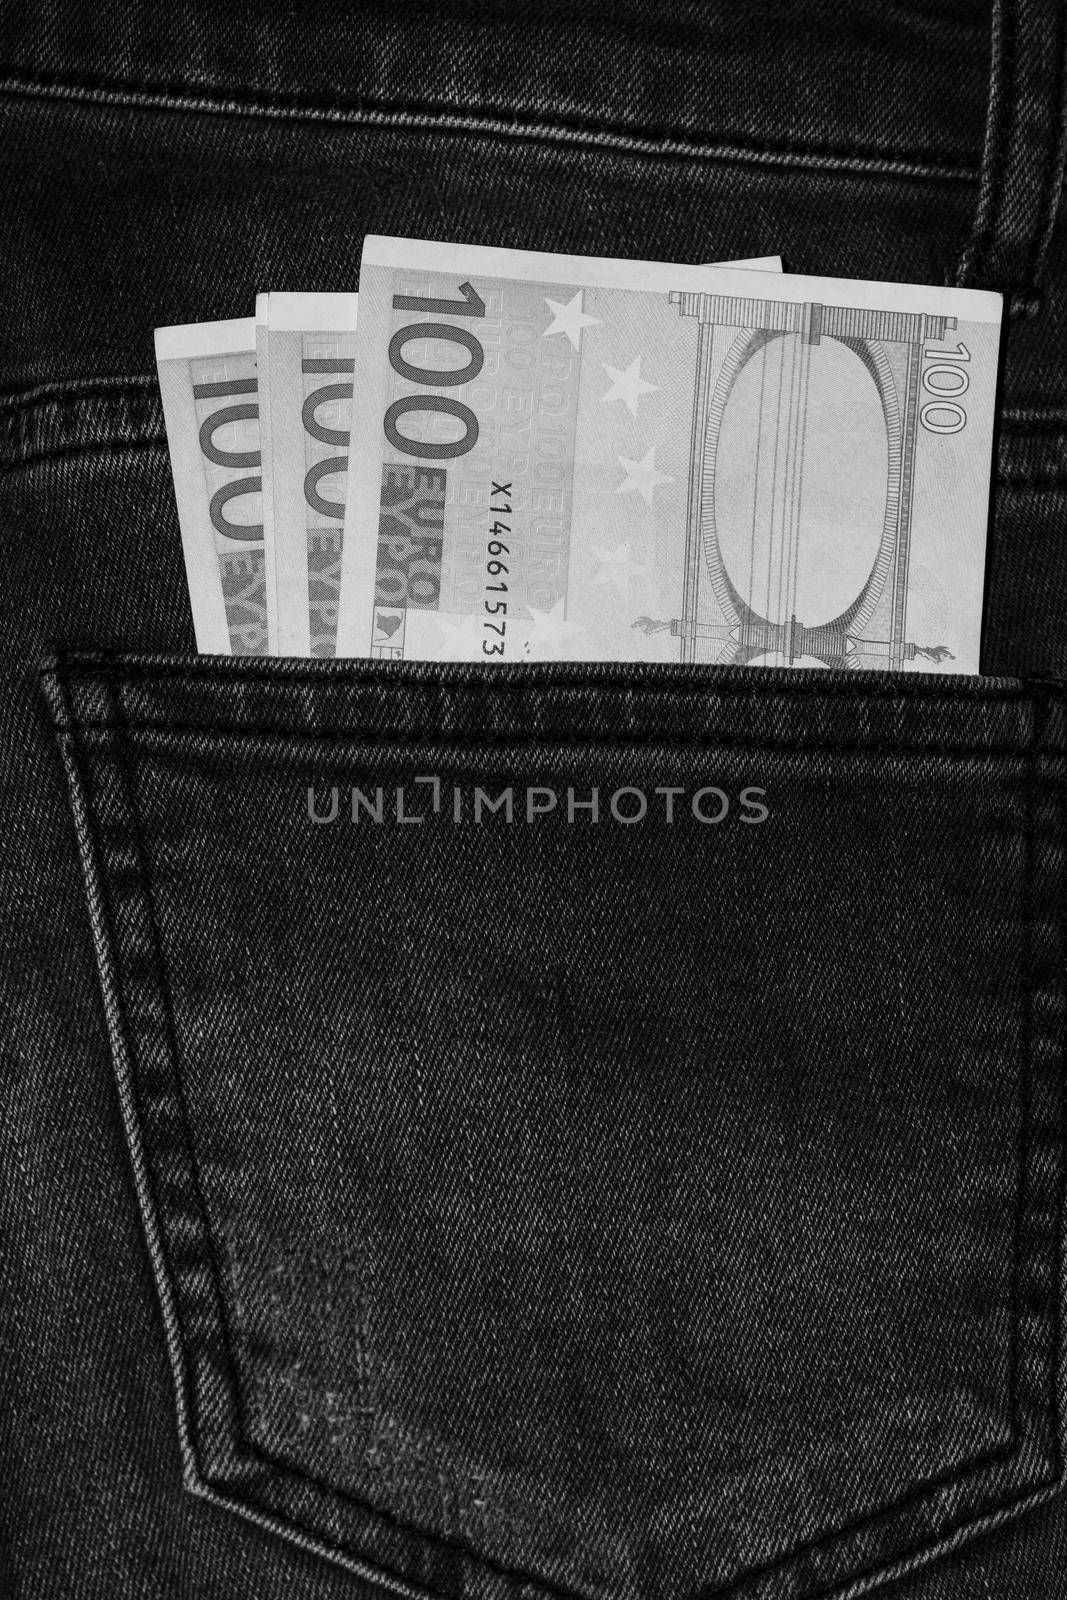 Banknotes, money in a jeans pocket, close up. Money stick out of the jeans pocket, finance and currency concept. Concept of rich people, saving or spending money.